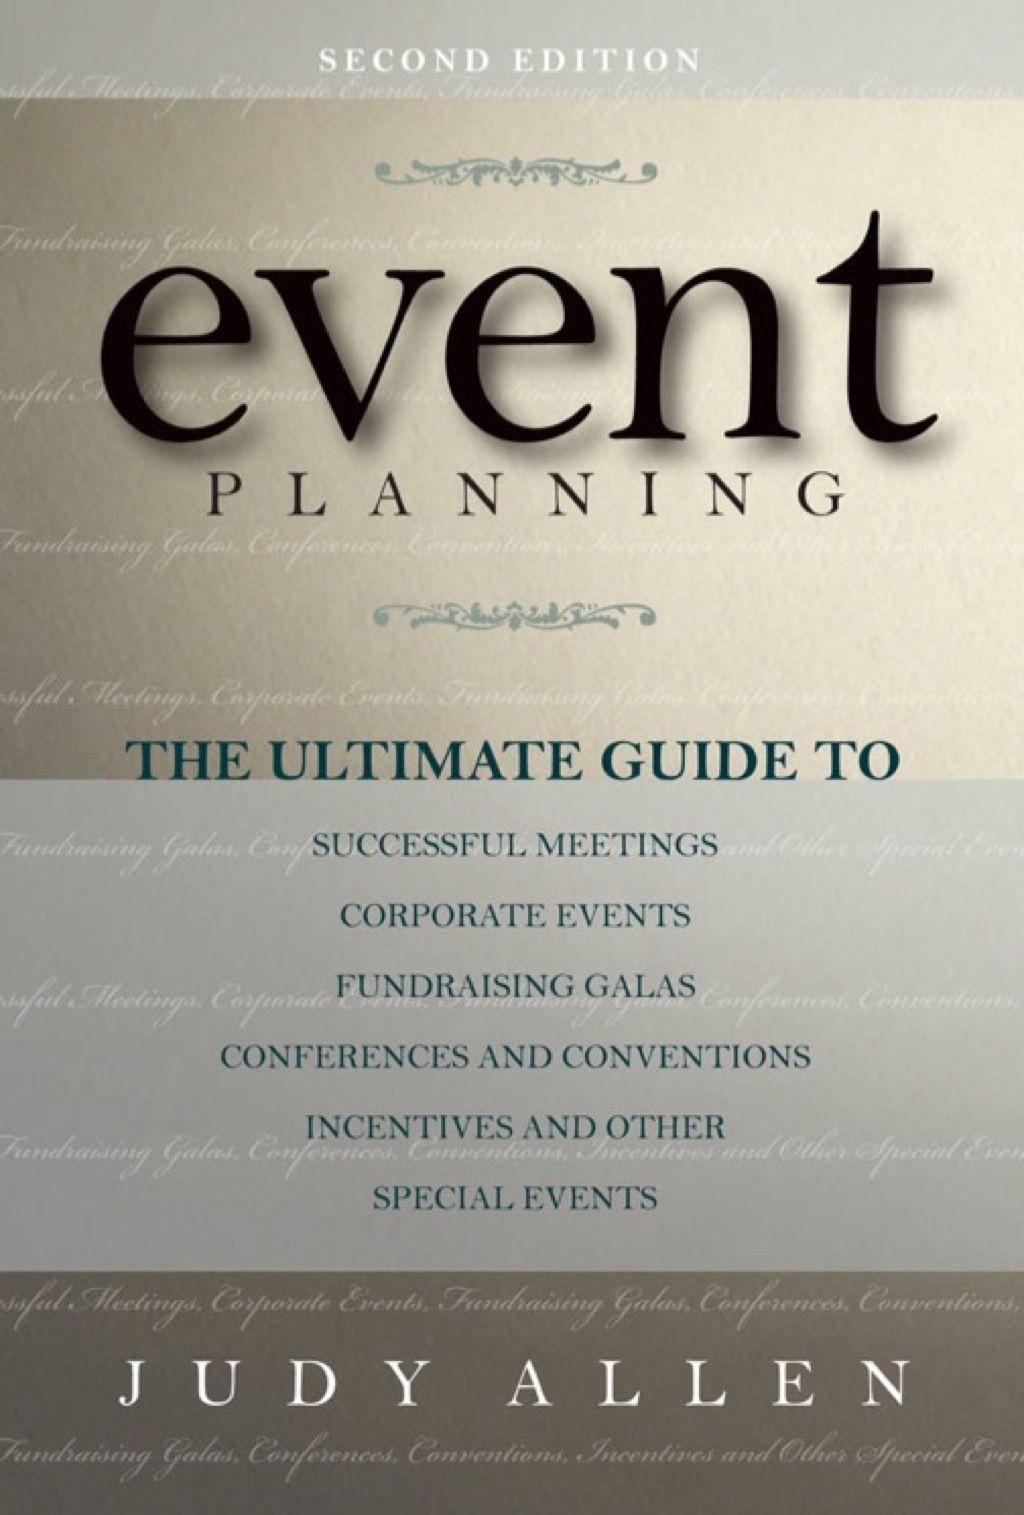 Event Planning: The Ultimate Guide To Successful Meetings  Corporate Events  Fundraising Galas  Conferences  Conventions  (eBook Rental) -   12 Event Planning Pricing guide ideas